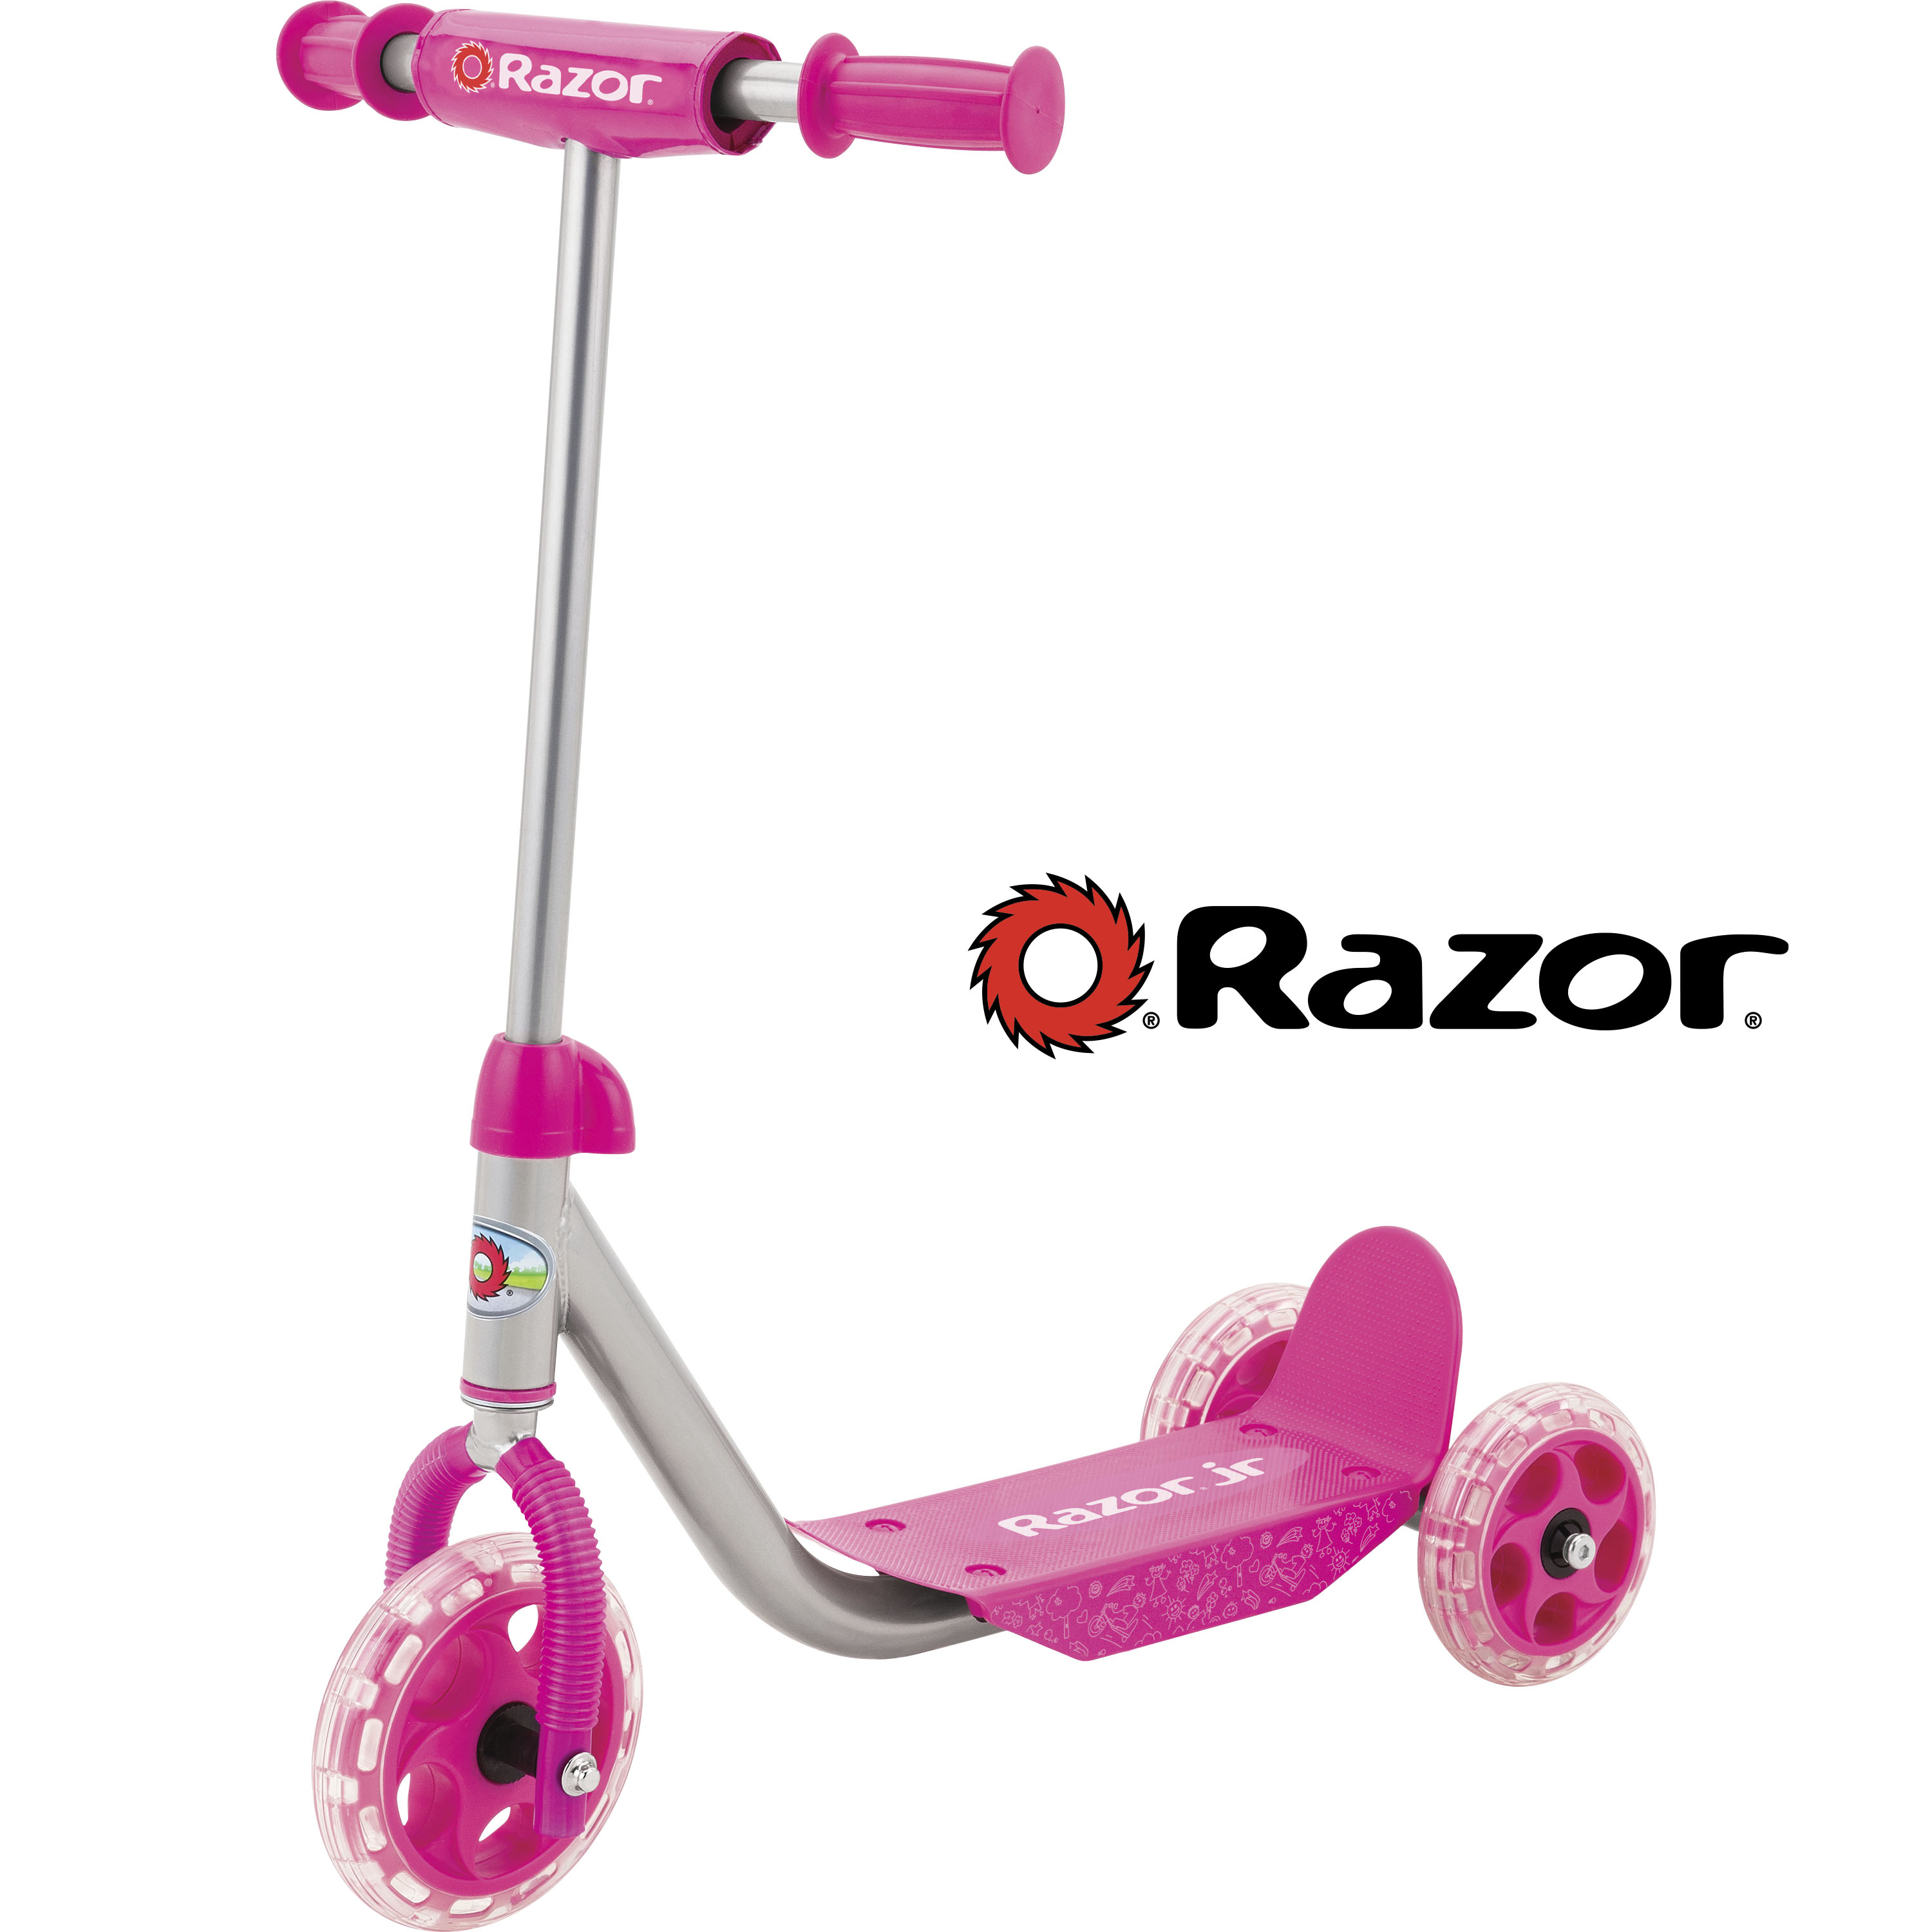 Razor Jr. 3-Wheel Lil' Kick Scooter - Ages 3+ and riders up to 44 lbs - image 2 of 7